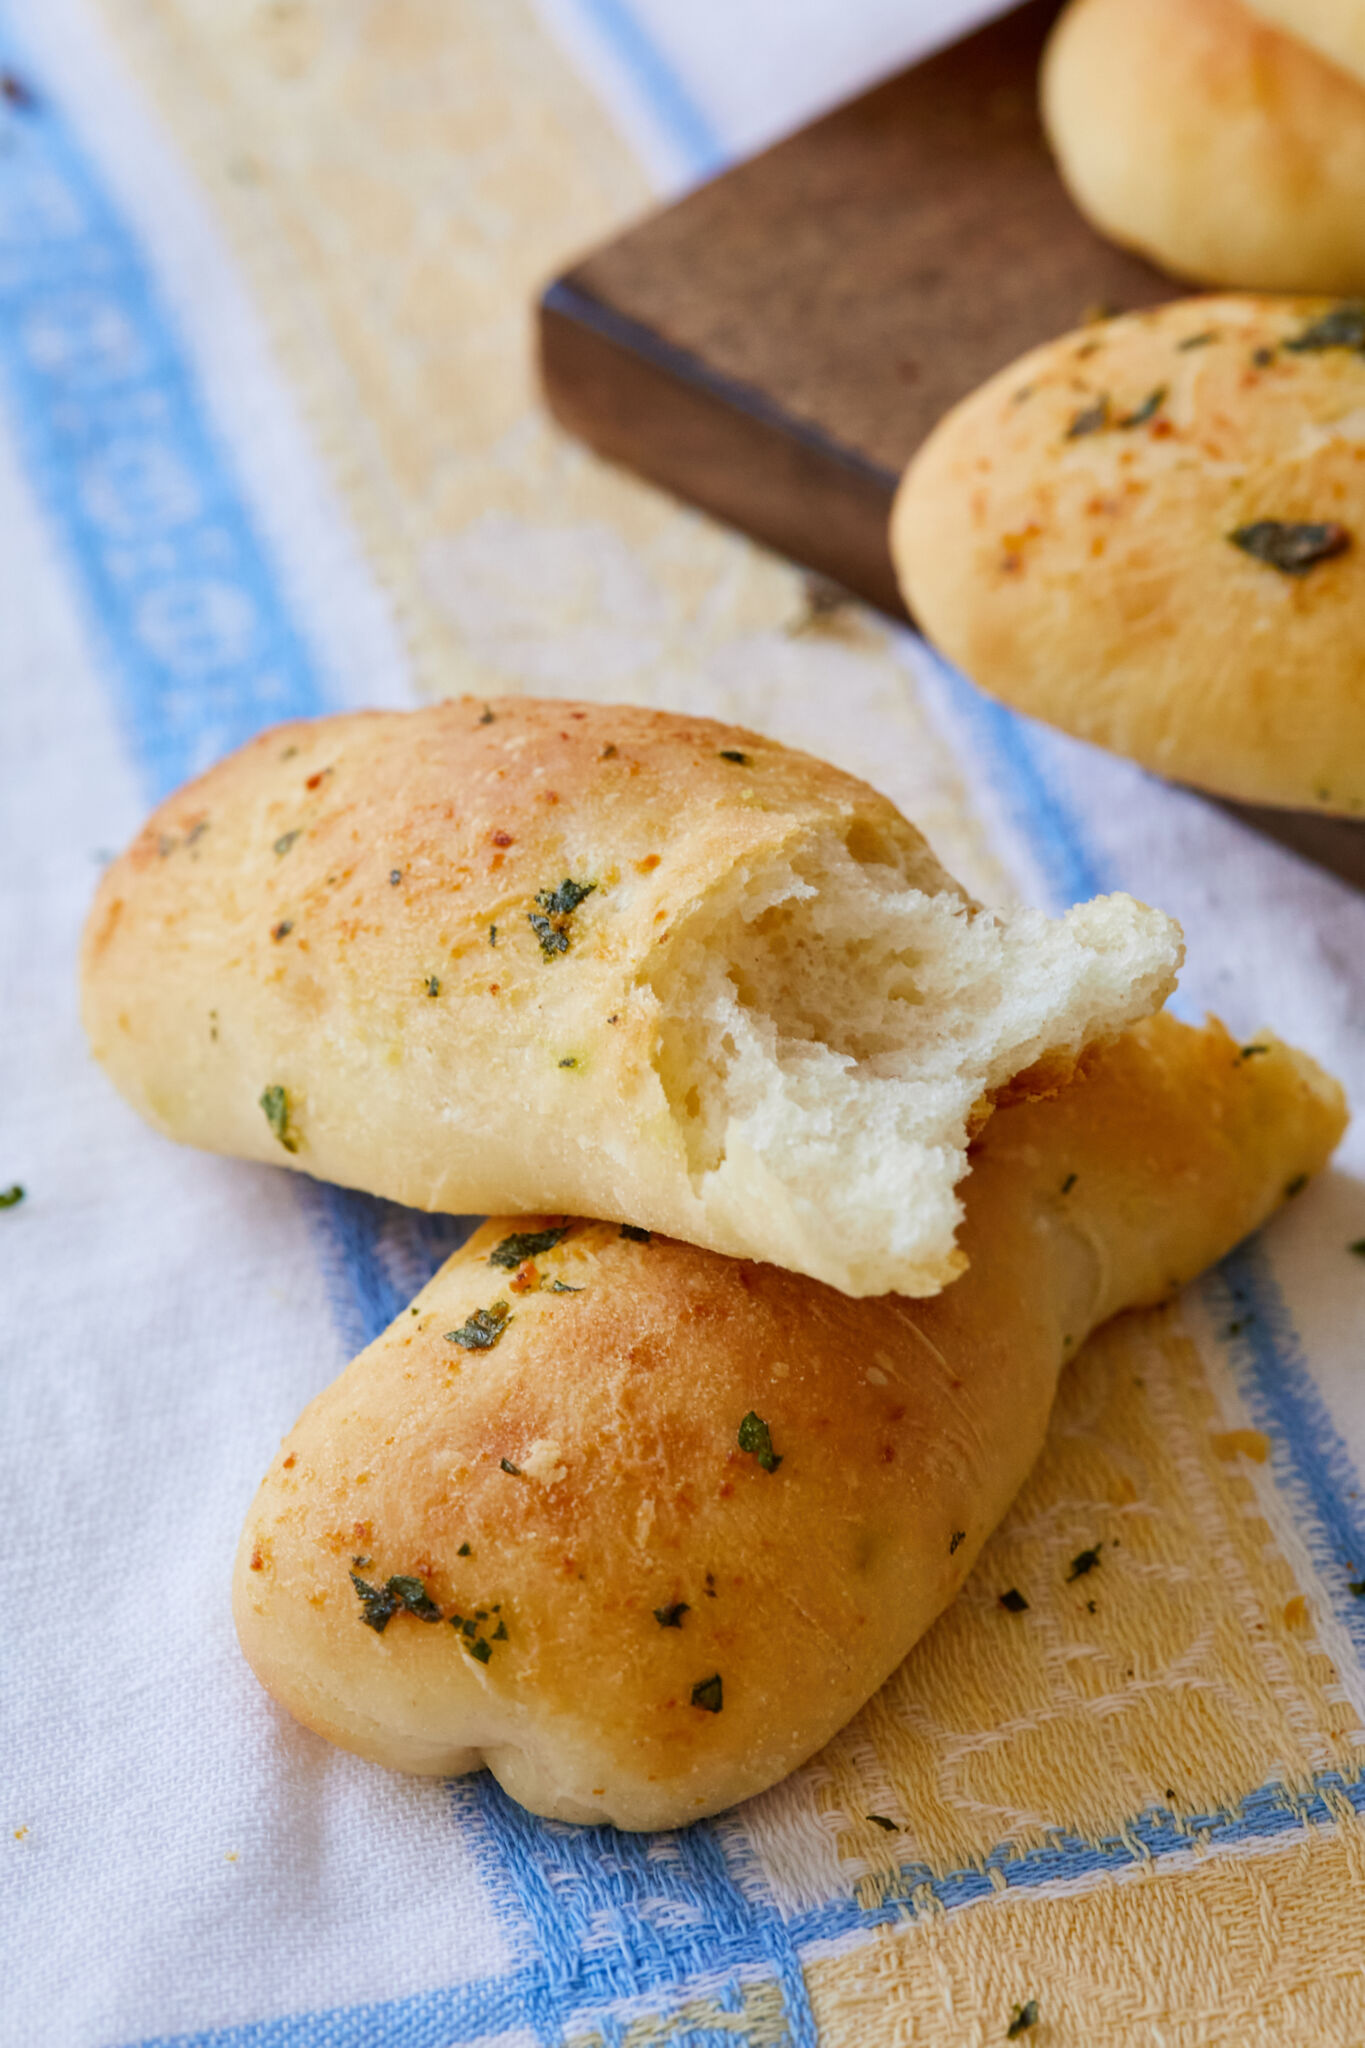 Garlic Breadsticks are shaped into long, thin rods and were baked until golden brown. The exterior looks slightly crispy with brushed butter, garlic and herbs. One stick is broken into halves, showing the light fluffy crumb. 